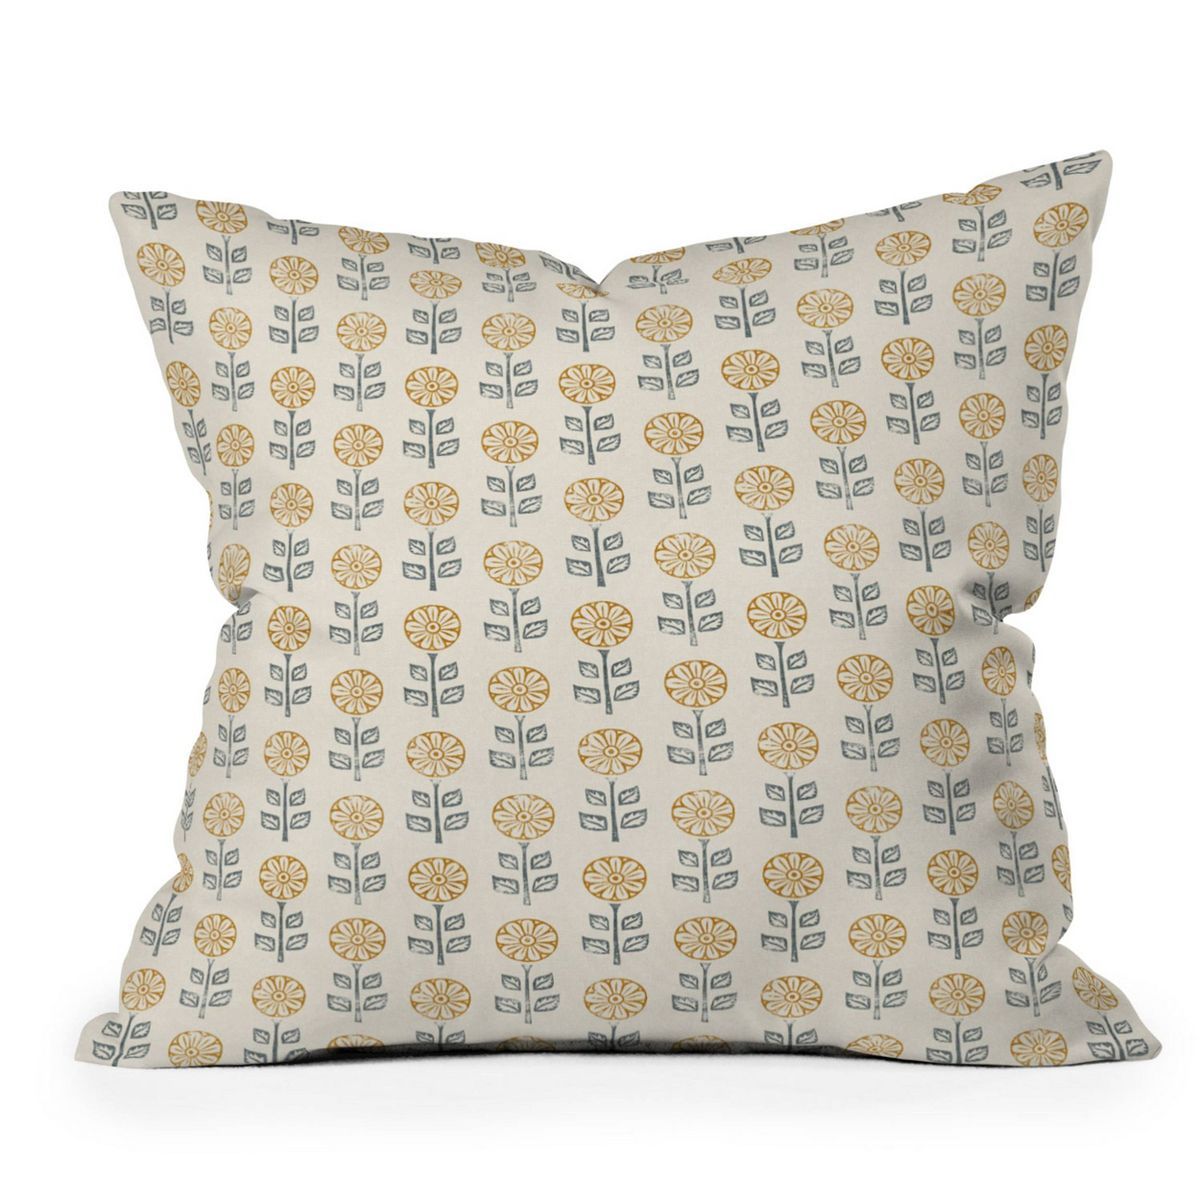 16"x16" Jessica Prout Block Print Floral Square Throw Pillow Gold - Deny Designs | Target